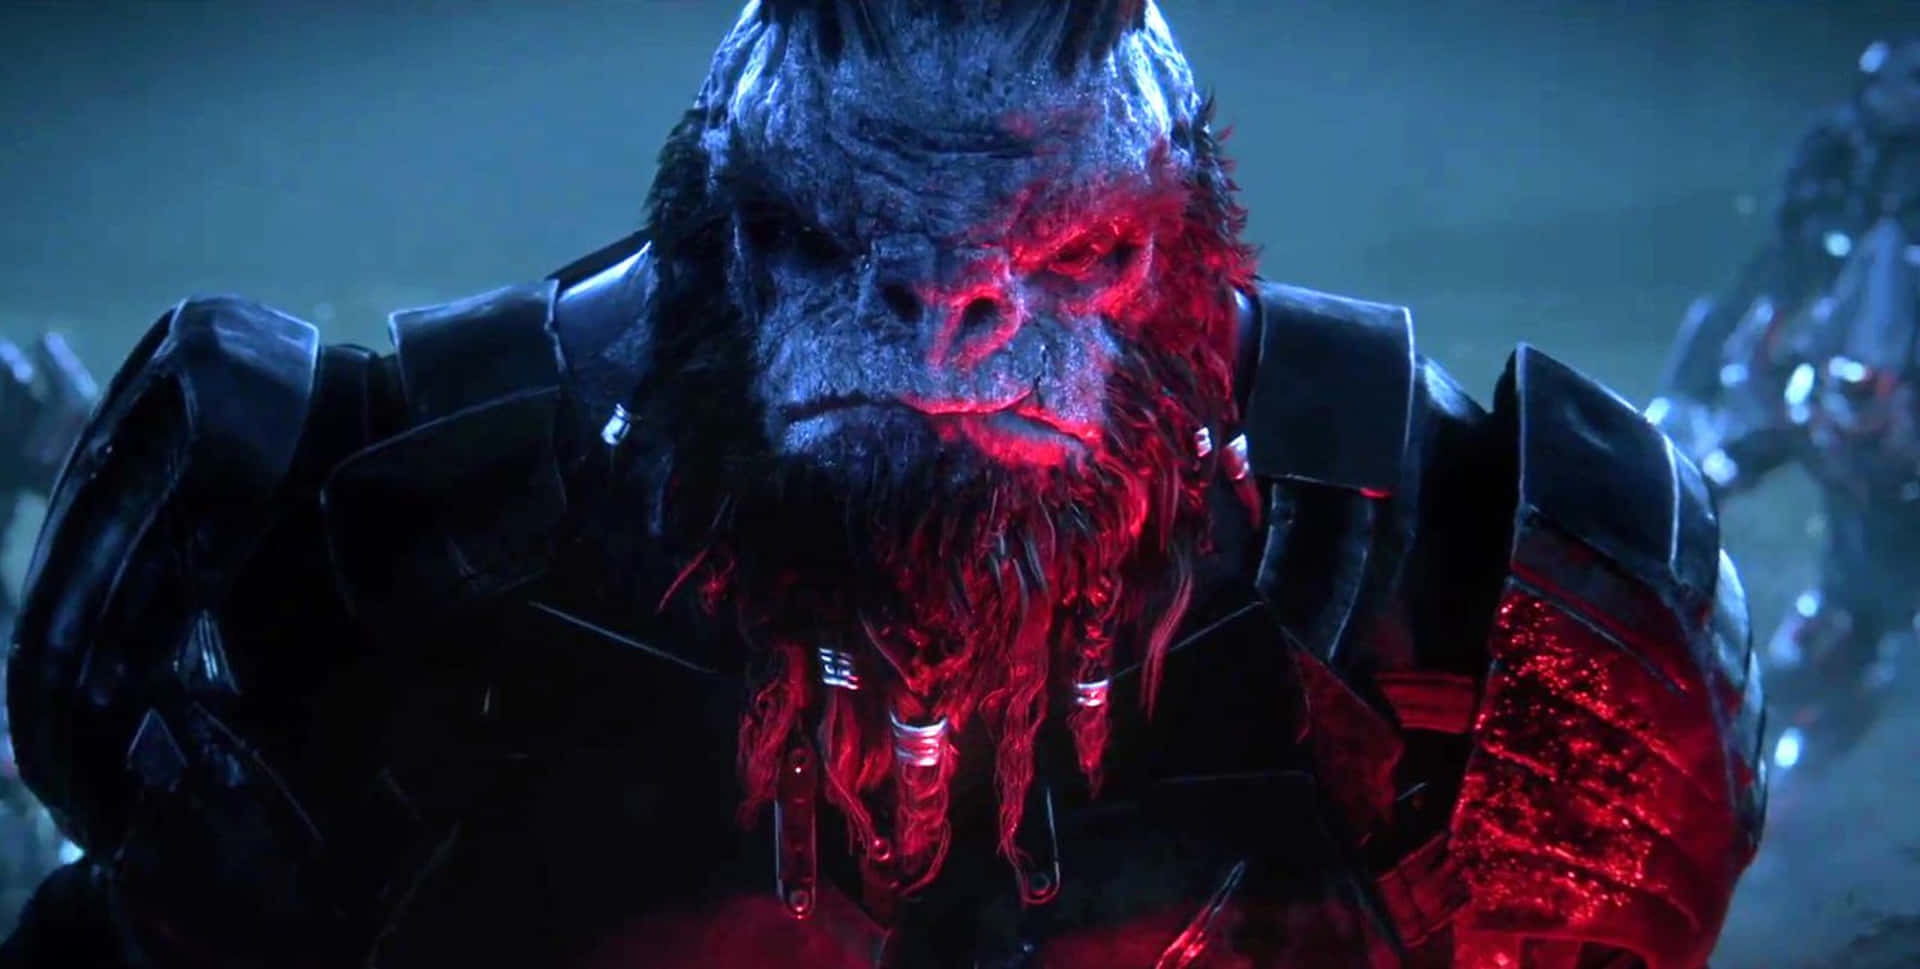 Atriox, the mighty Halo Wars 2 antagonist, in an epic action scene Wallpaper